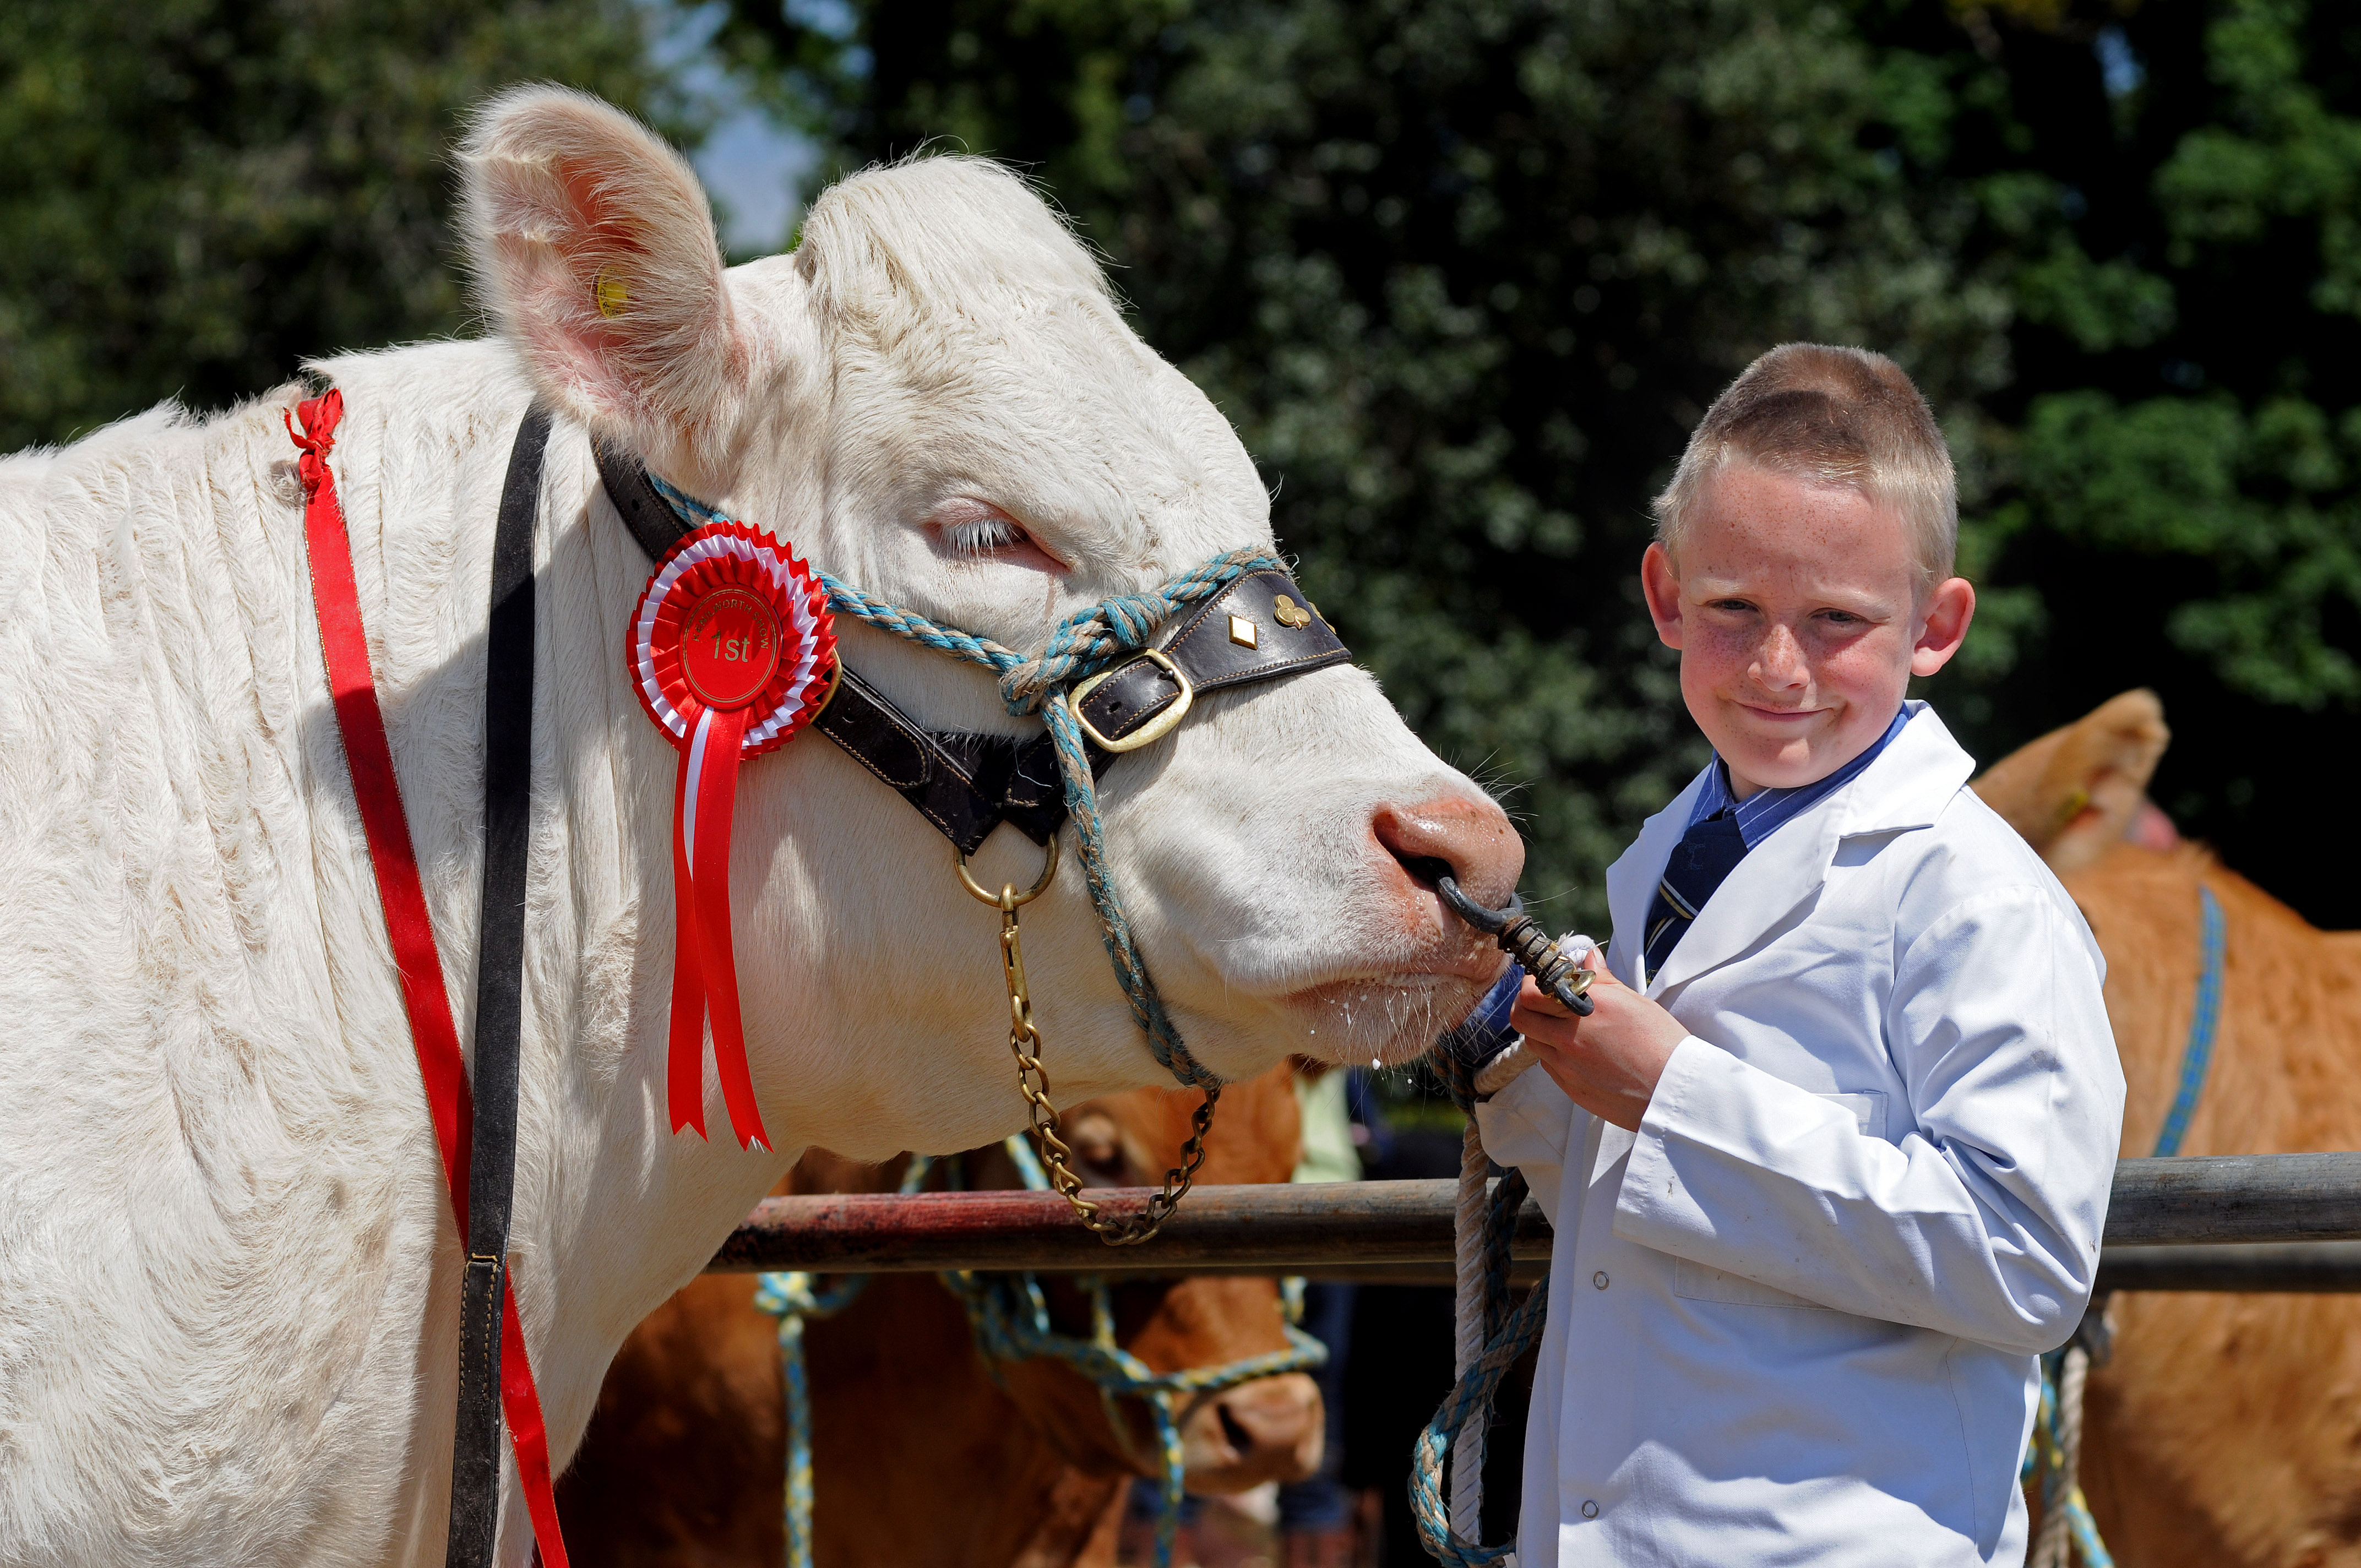 The Kenilworth Show takes place on June 7